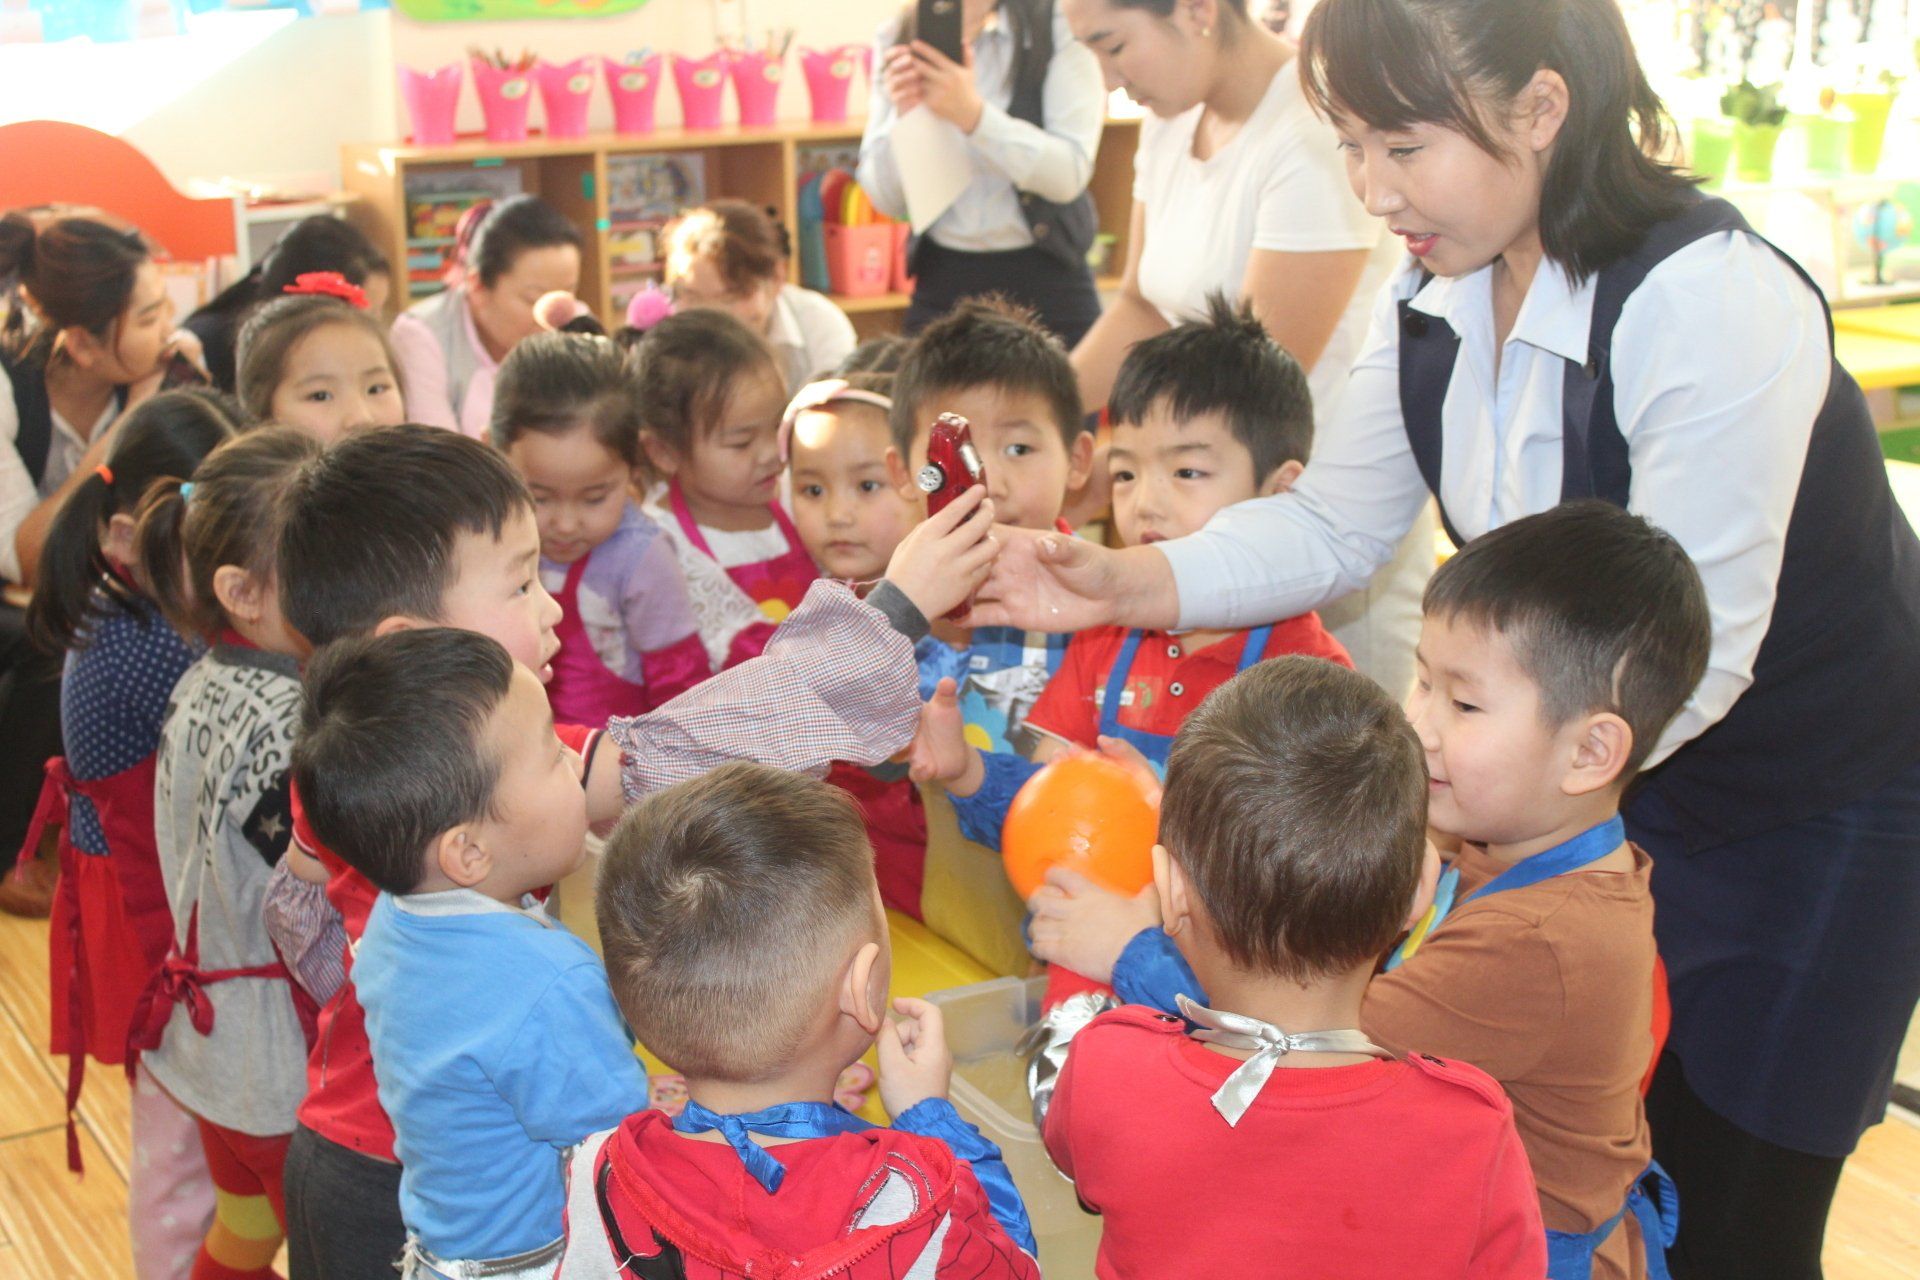 A group of young students gathered around a teacher; the teacher is handing a toy model car to one of the students. 